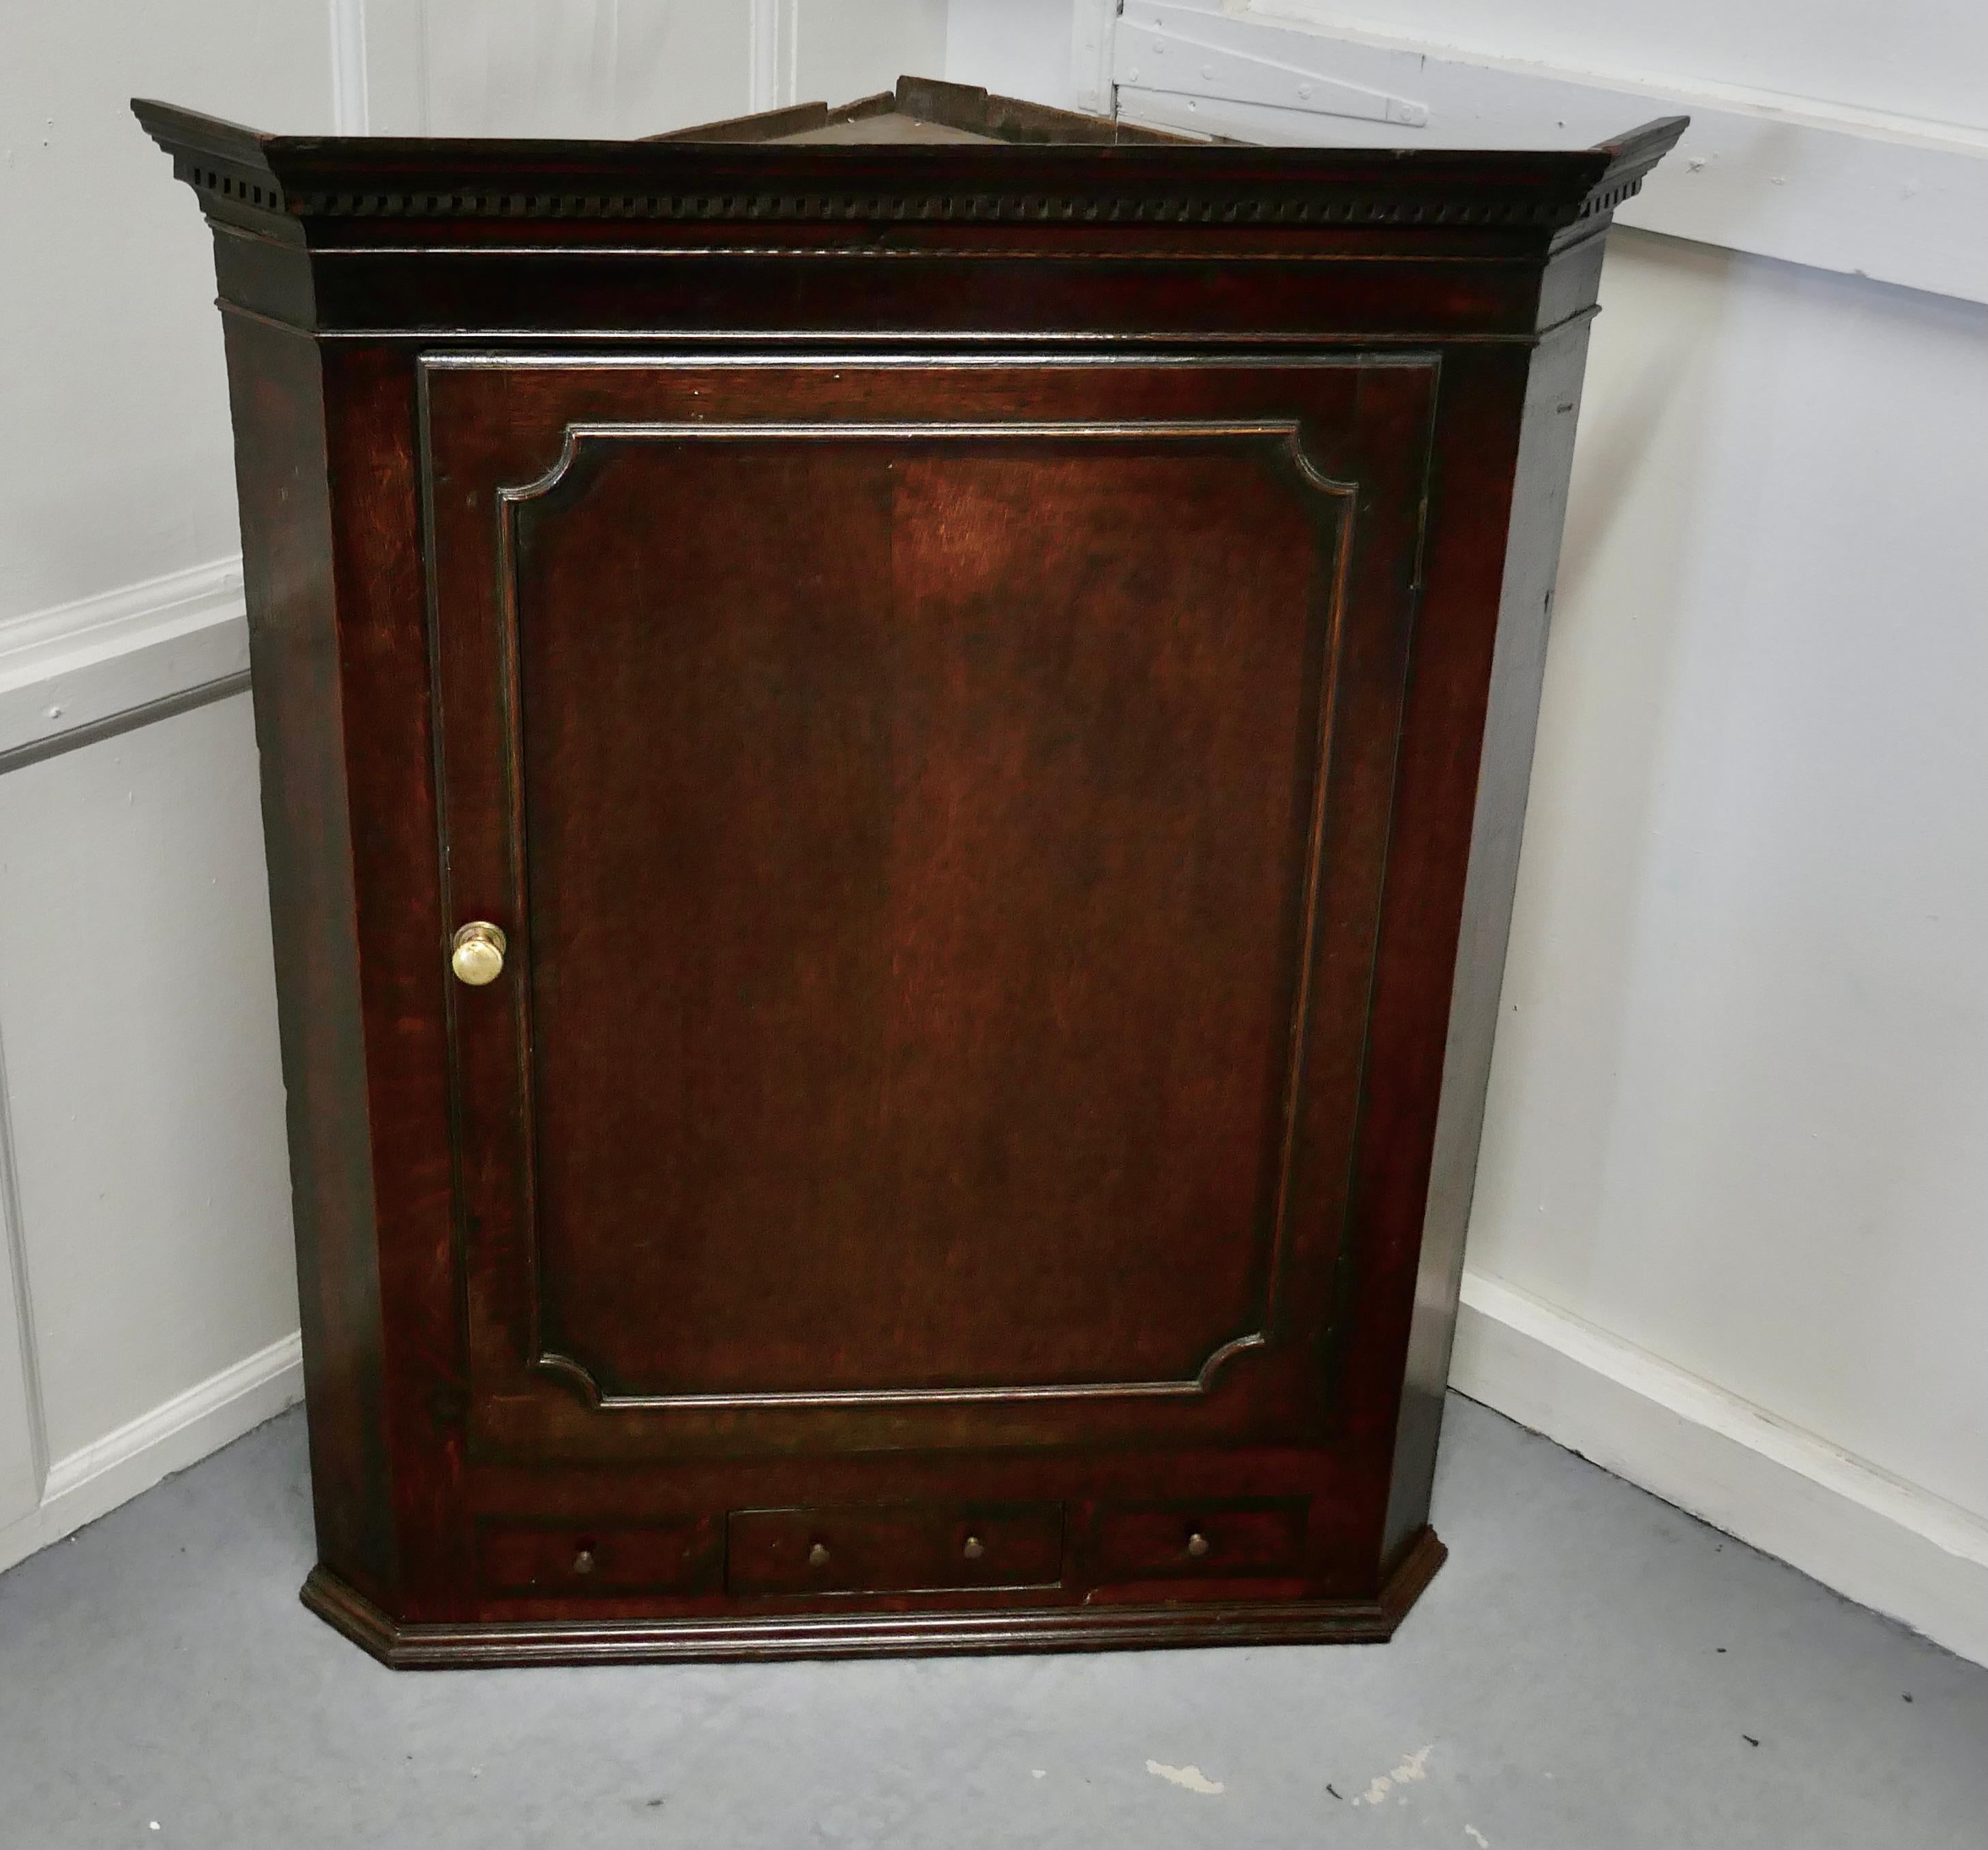 18th century inlaid country oak corner cupboard

18th century corner cupboard made in country oak, it has a panel door enclosing 3 shaped corner shelves, the original paper lining is still present and has a good bright colour
At the bottom there